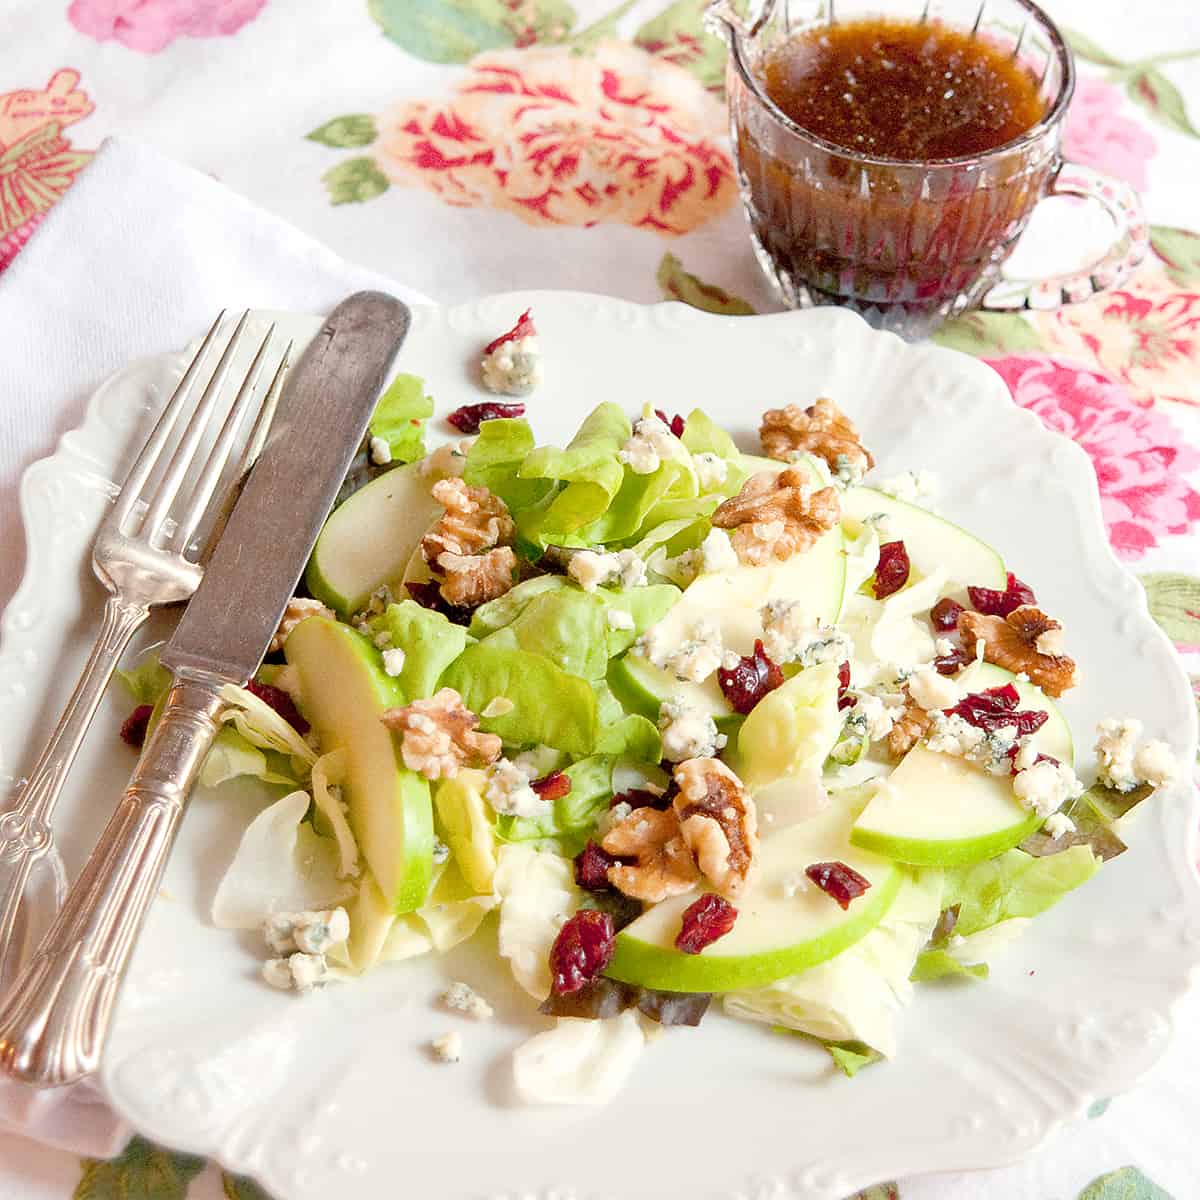 Apple Cranberry Salad on a vintage plate with antique flatware.